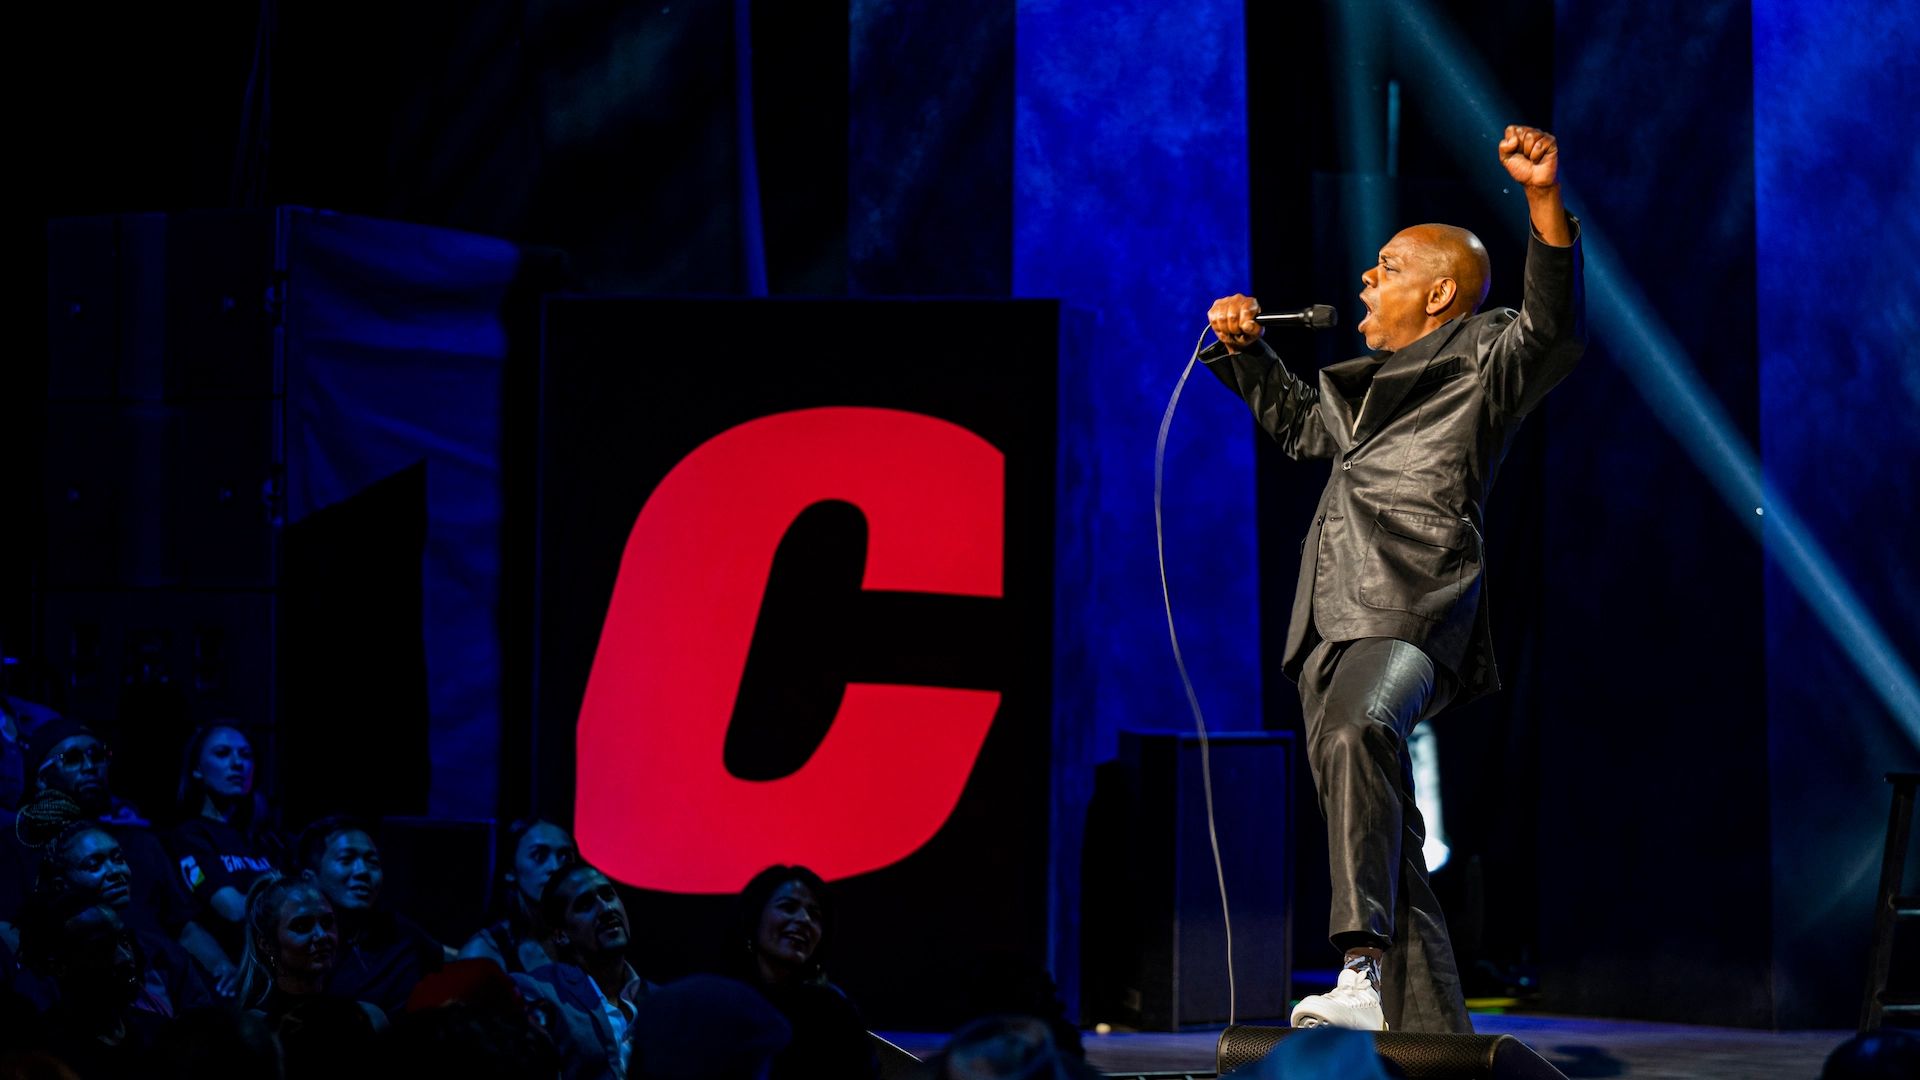 Dave Chappelle: The Closer background